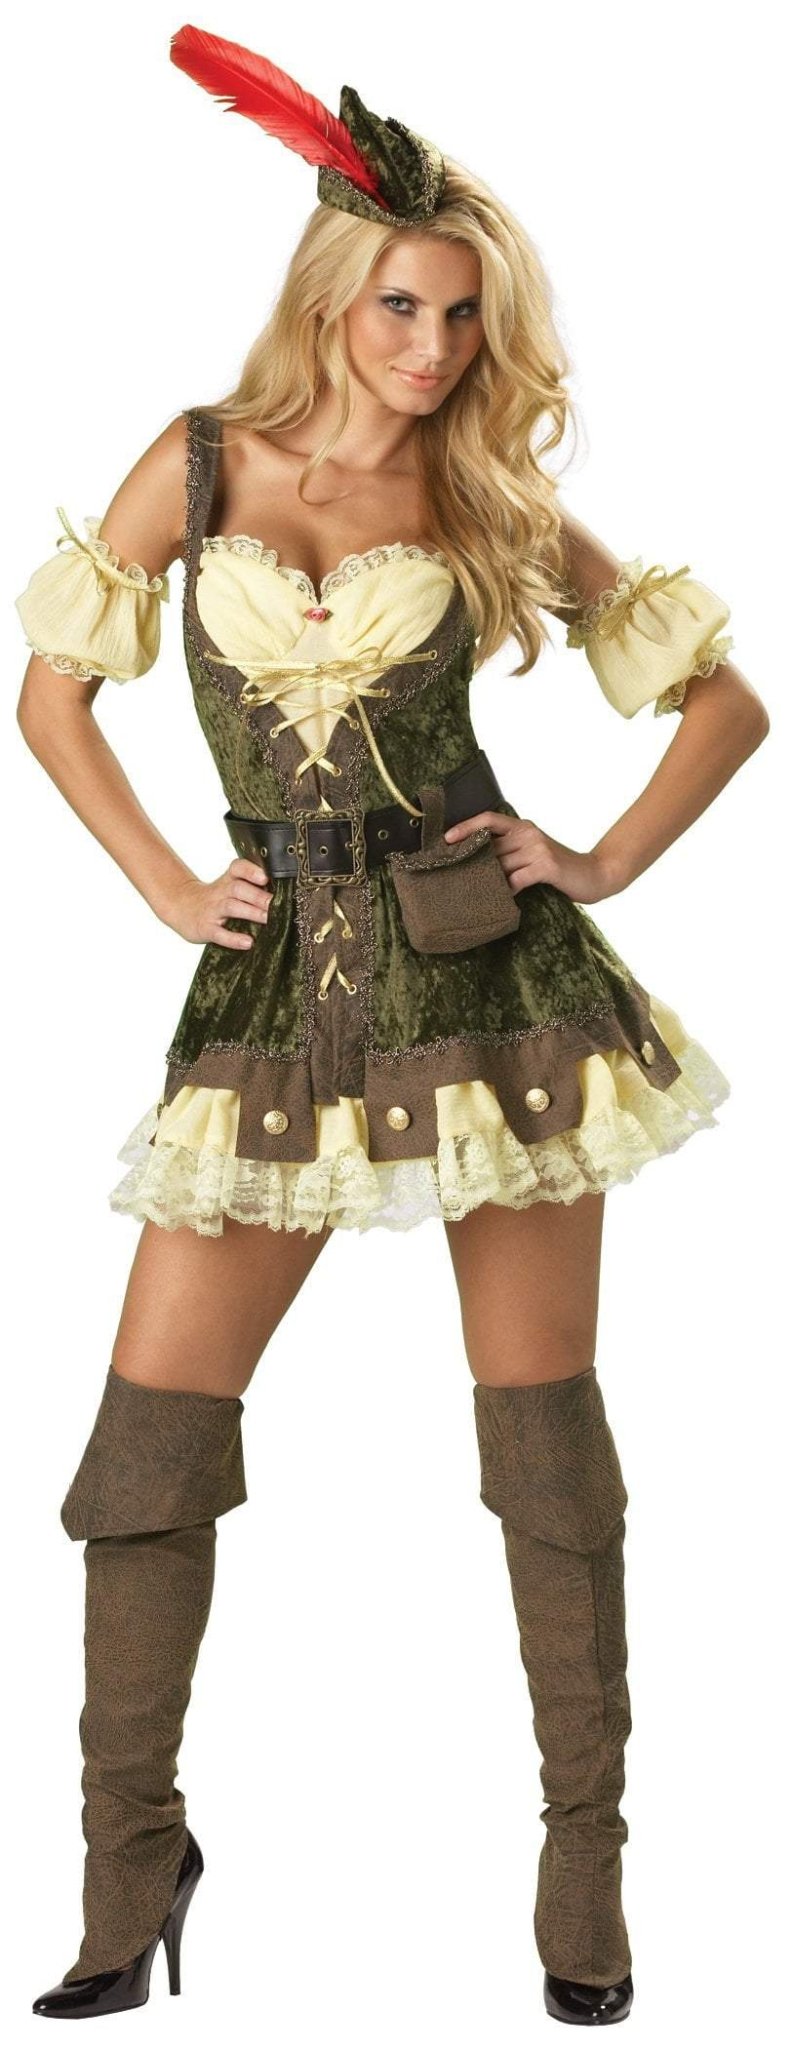 Racy Robin Hood Deluxe Costume - JJ's Party House